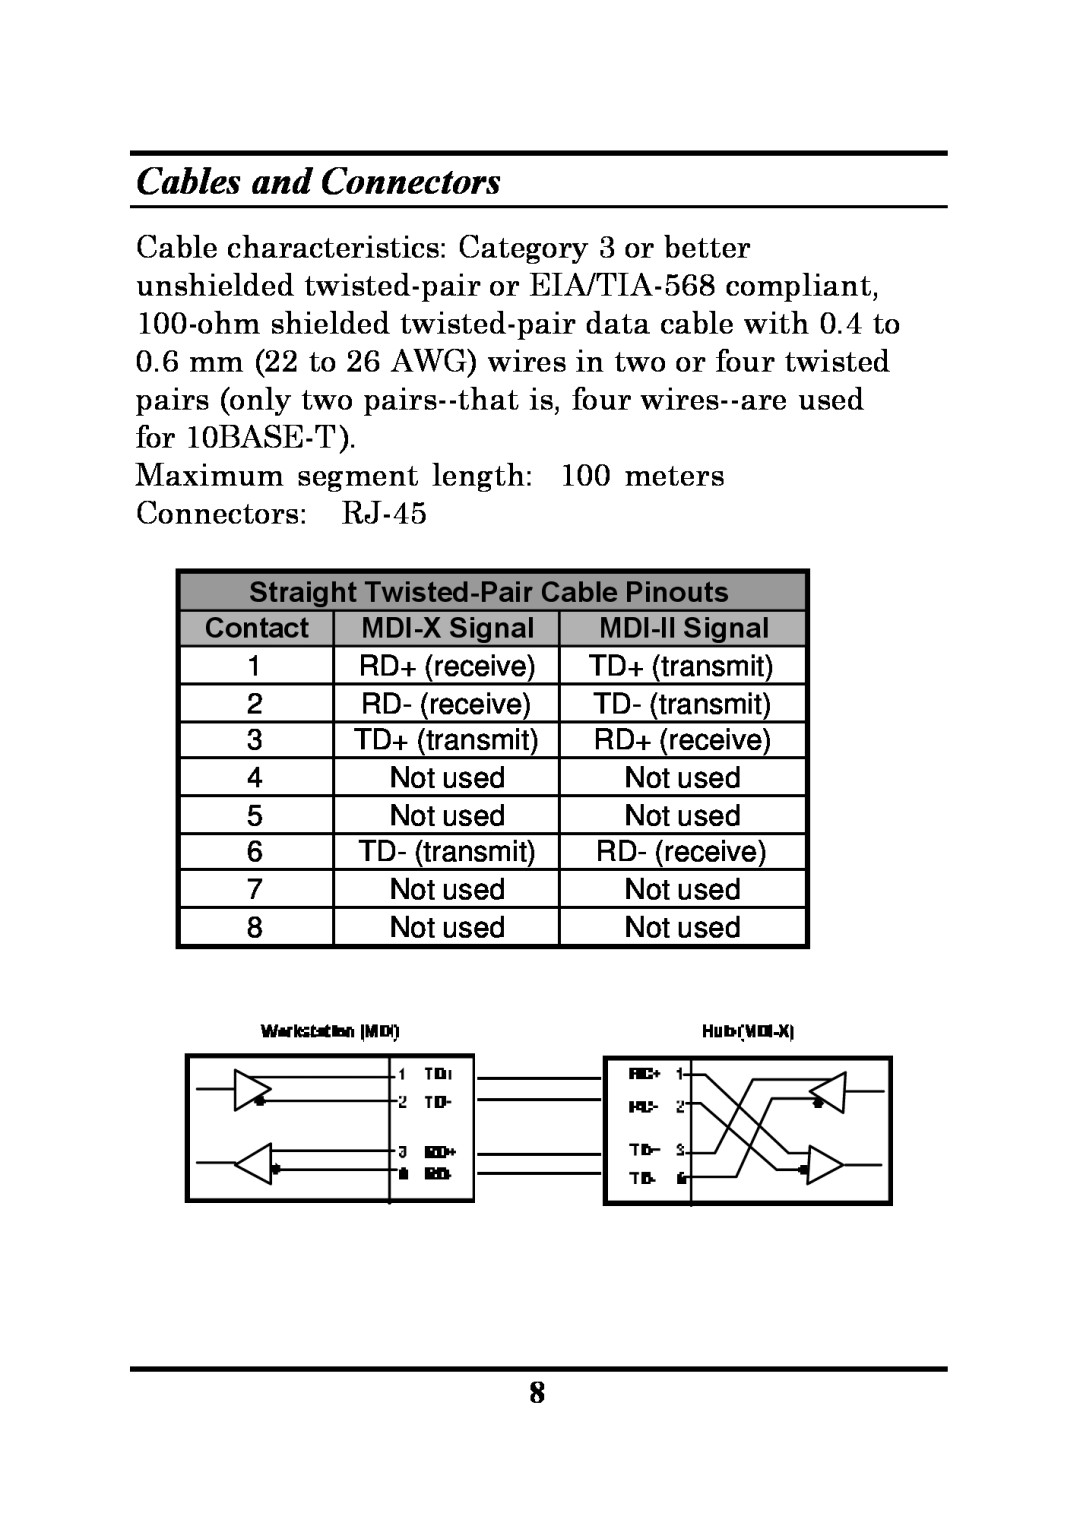 Palm ETHERNET HUB manual Cables and Connectors 